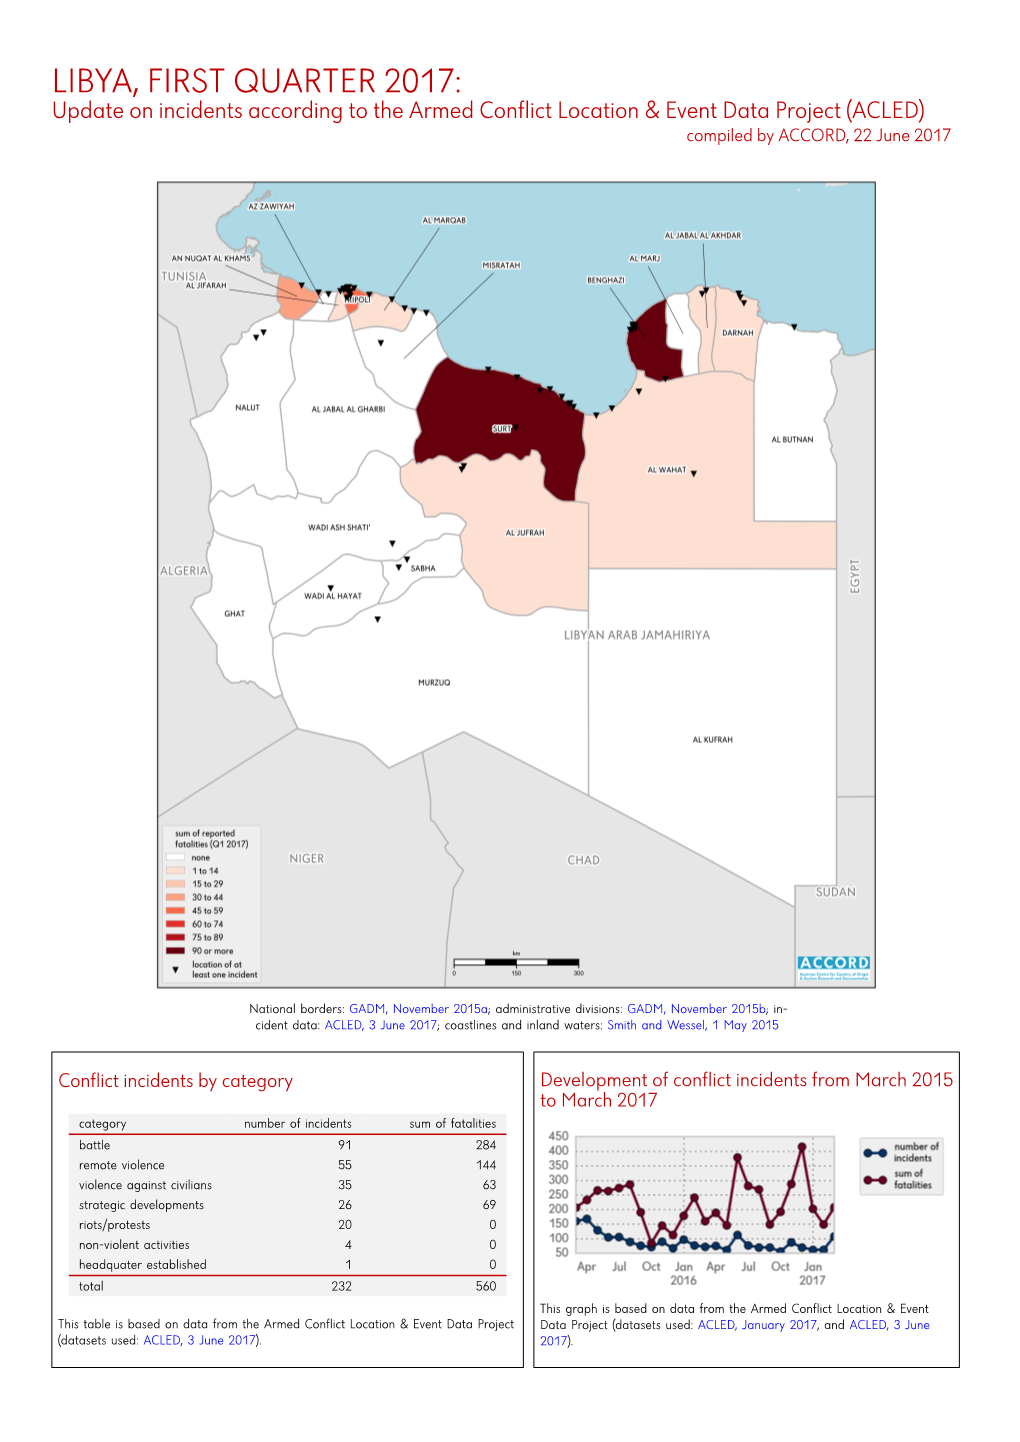 LIBYA, FIRST QUARTER 2017: Update on Incidents According to the Armed Conflict Location & Event Data Project (ACLED) Compiled by ACCORD, 22 June 2017